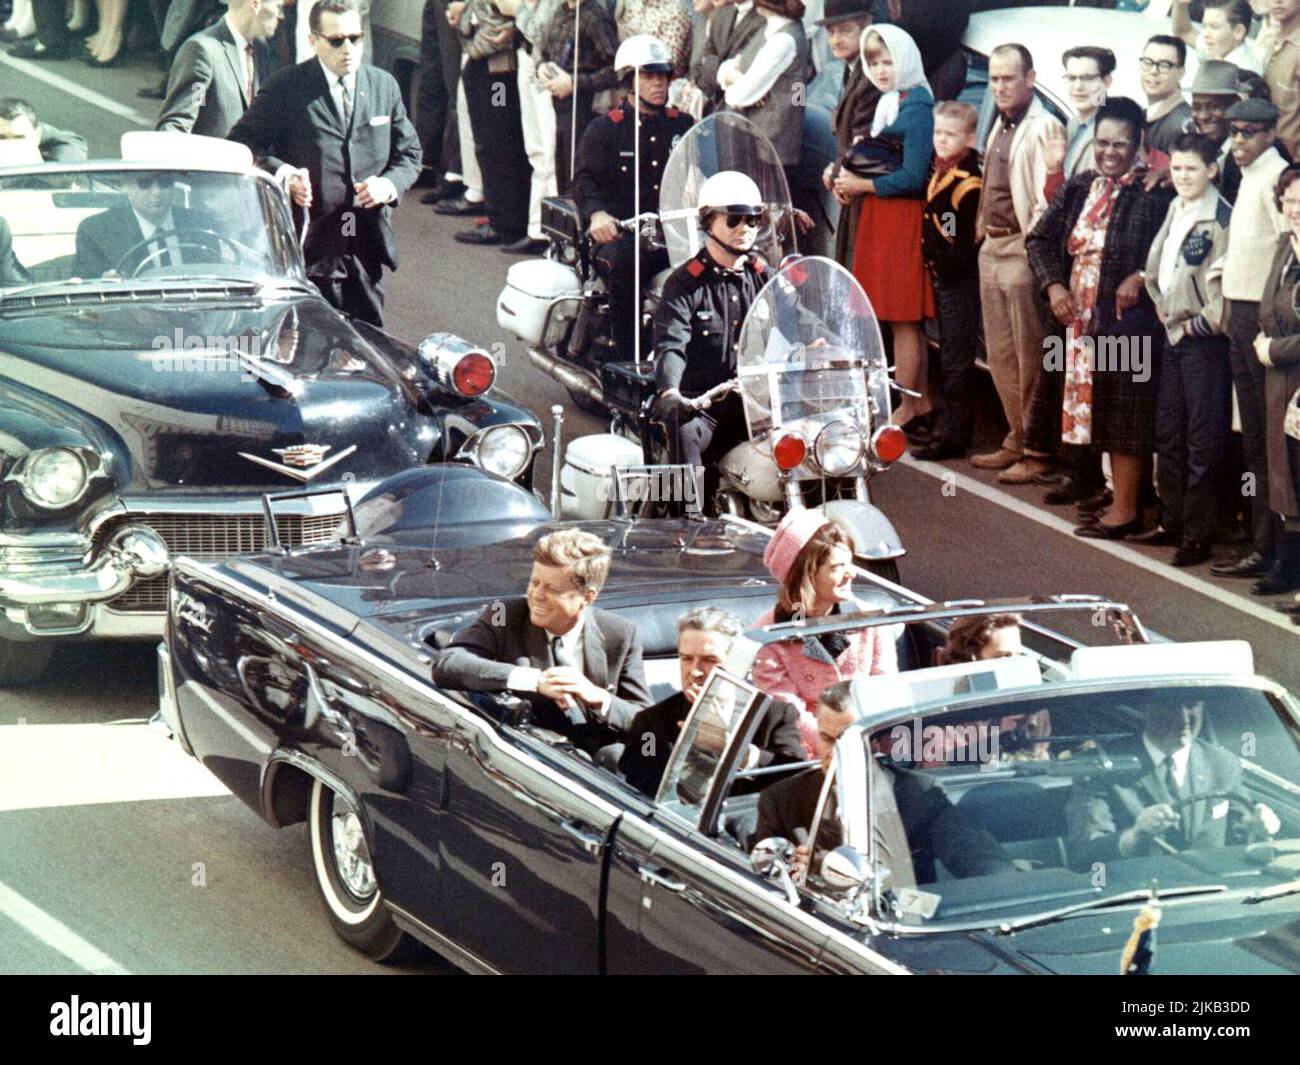 JOHN F. KENNEDY and JACQUELINE KENNEDY ONASSIS in JFK REVISITED: THROUGH THE LOOKING GLASS (2021), directed by OLIVER STONE. Credit: Ingenious Media / Ixtlan Productions / Album Stock Photo